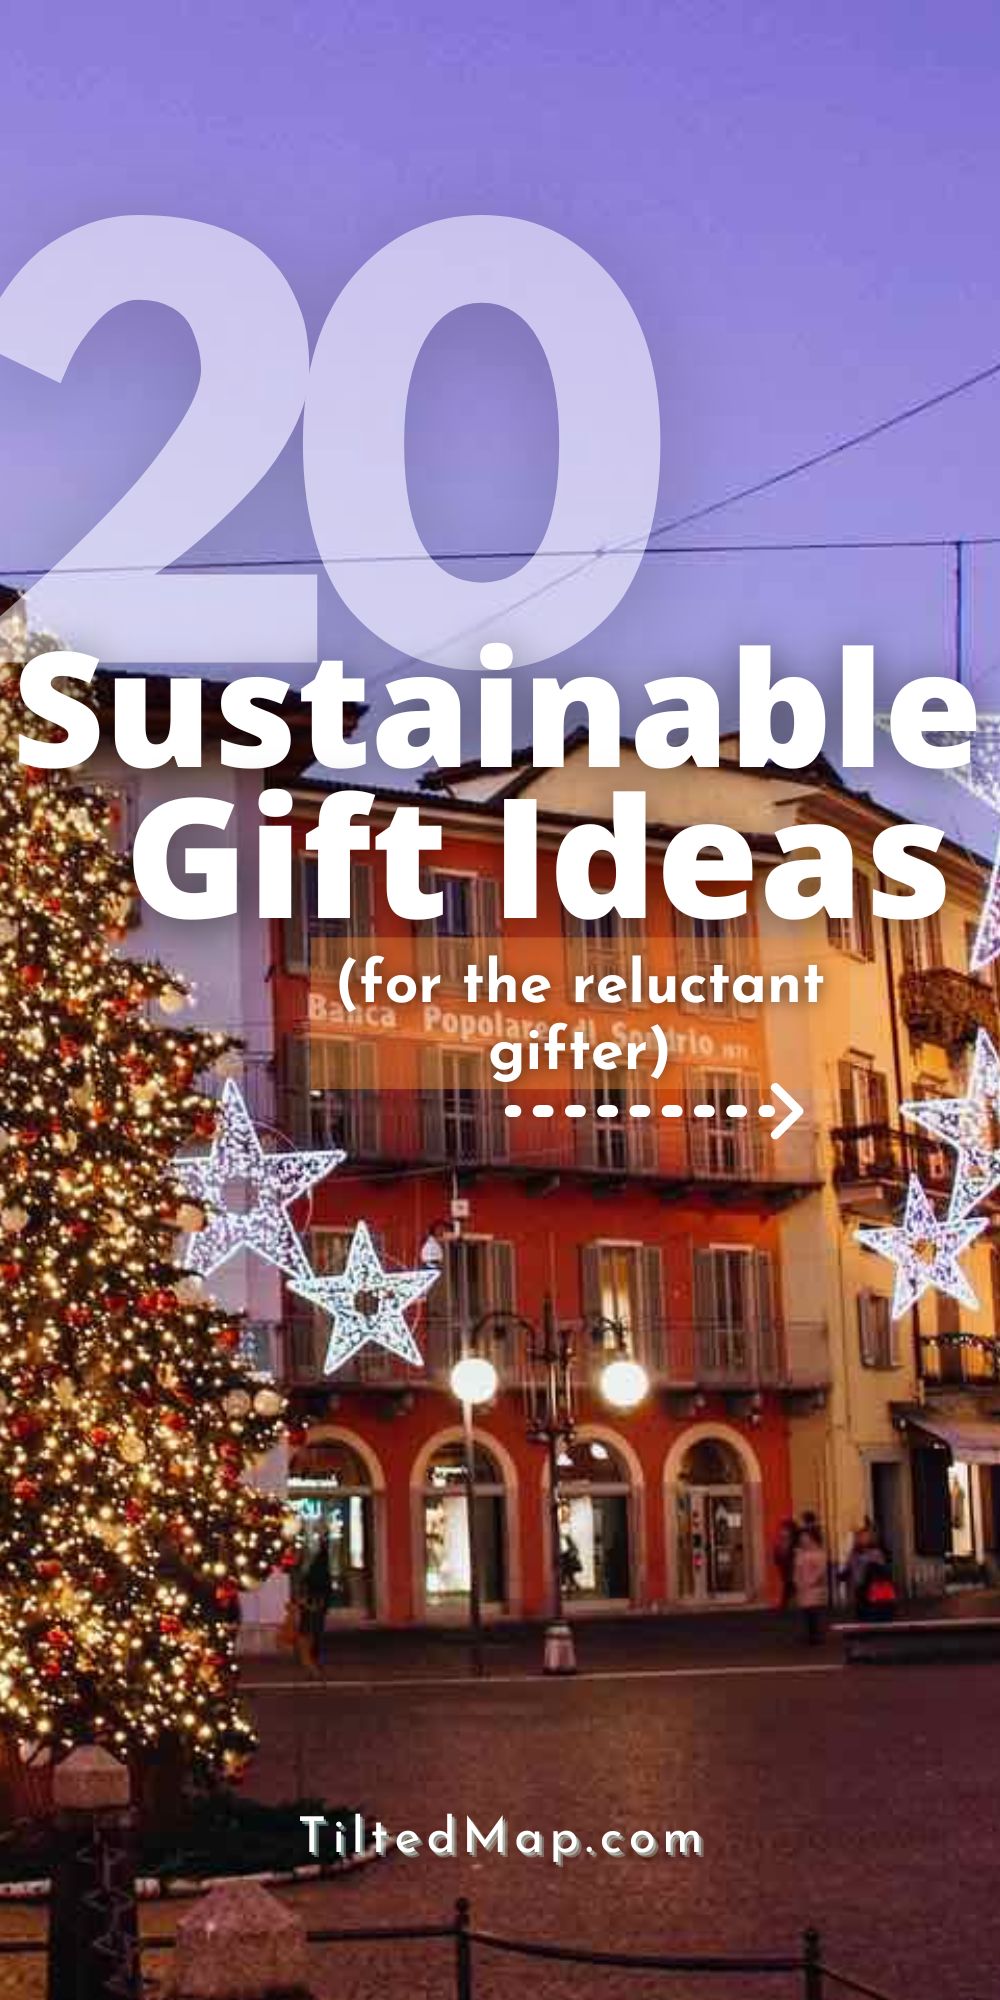 "20 Sustainable Gift Ideas for the Reluctant Gifter," from the blog TiltedMap.com, written over a photo of a brightly lit Christmas tree in a piazza in Italy.